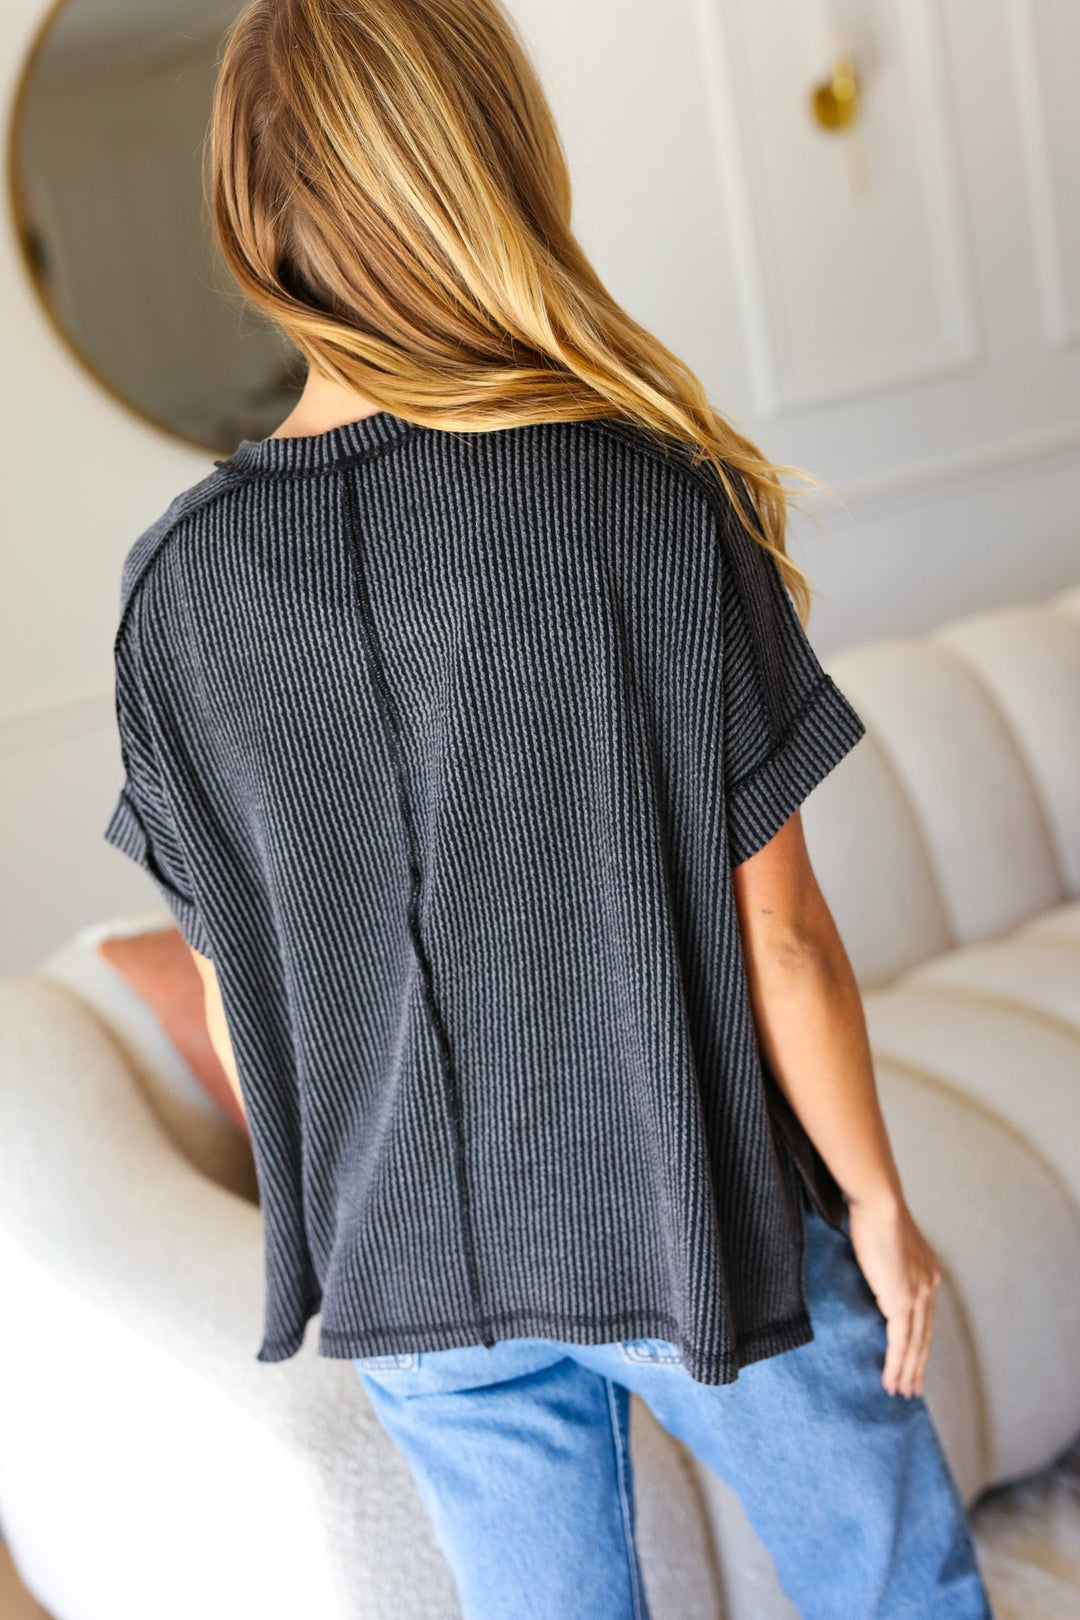 All That You Need - Charcoal Ribbed Top